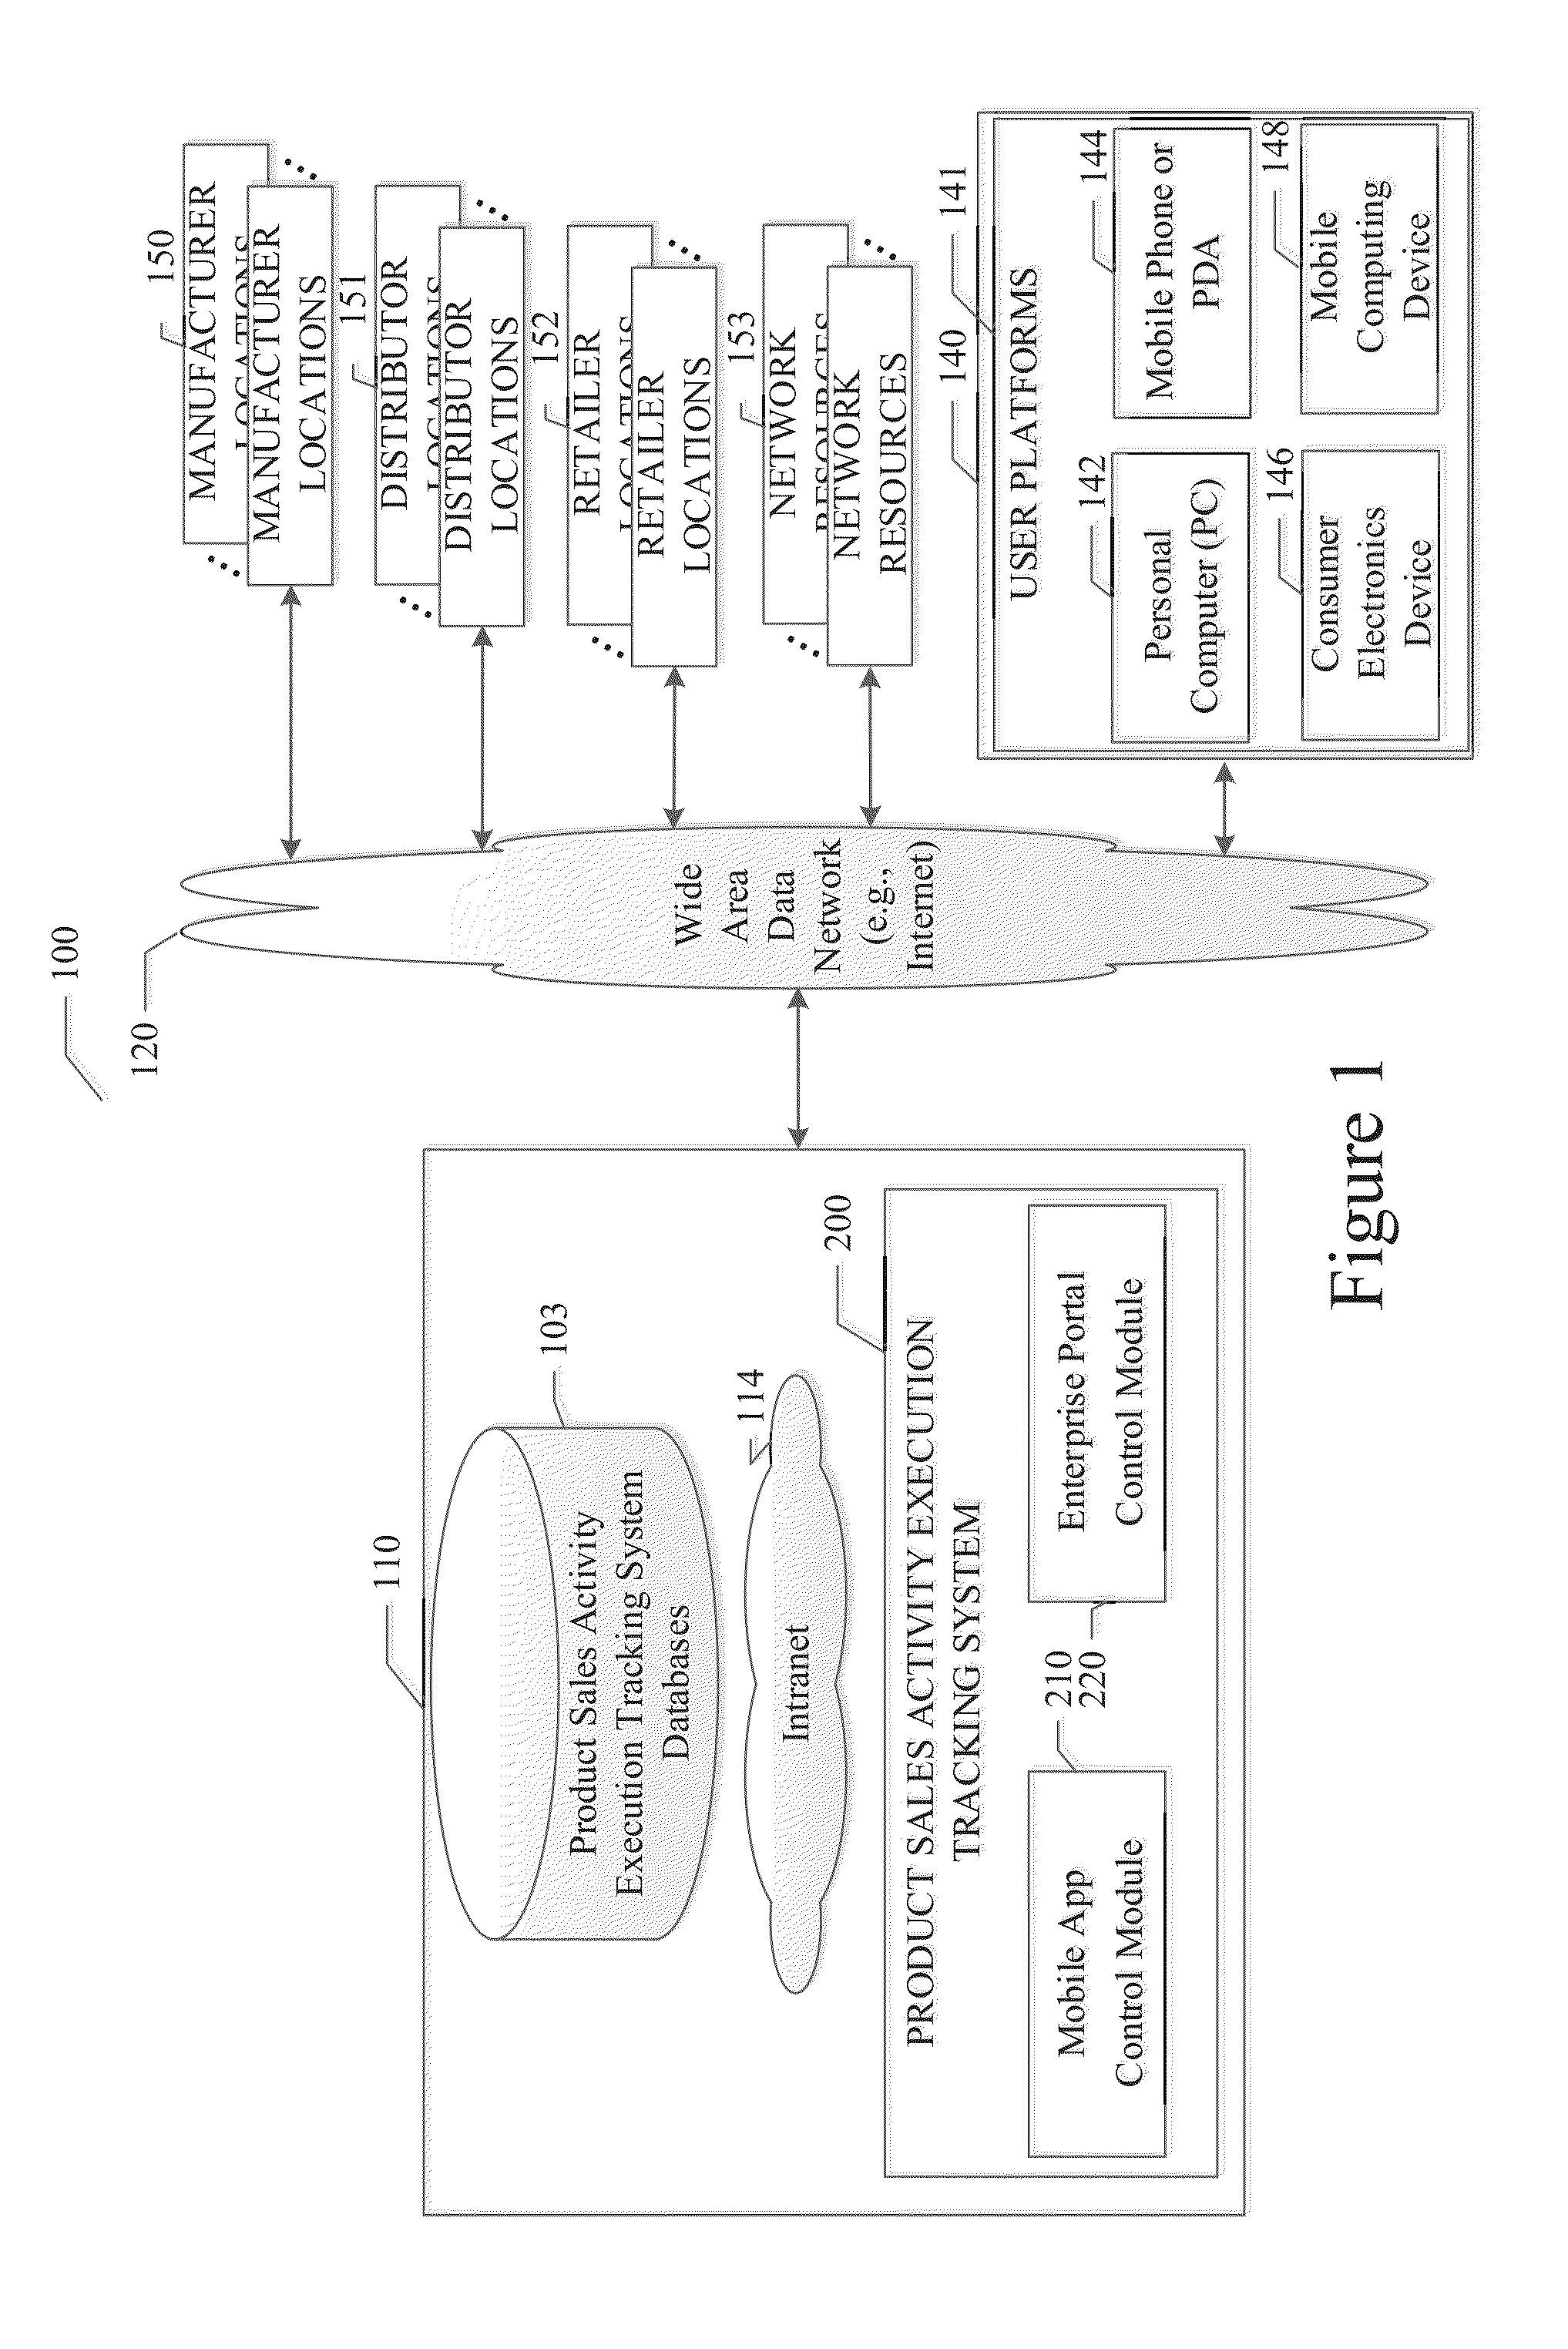 System and method for implementing a product sales activity execution tracking platform with annotated photos and cloud data